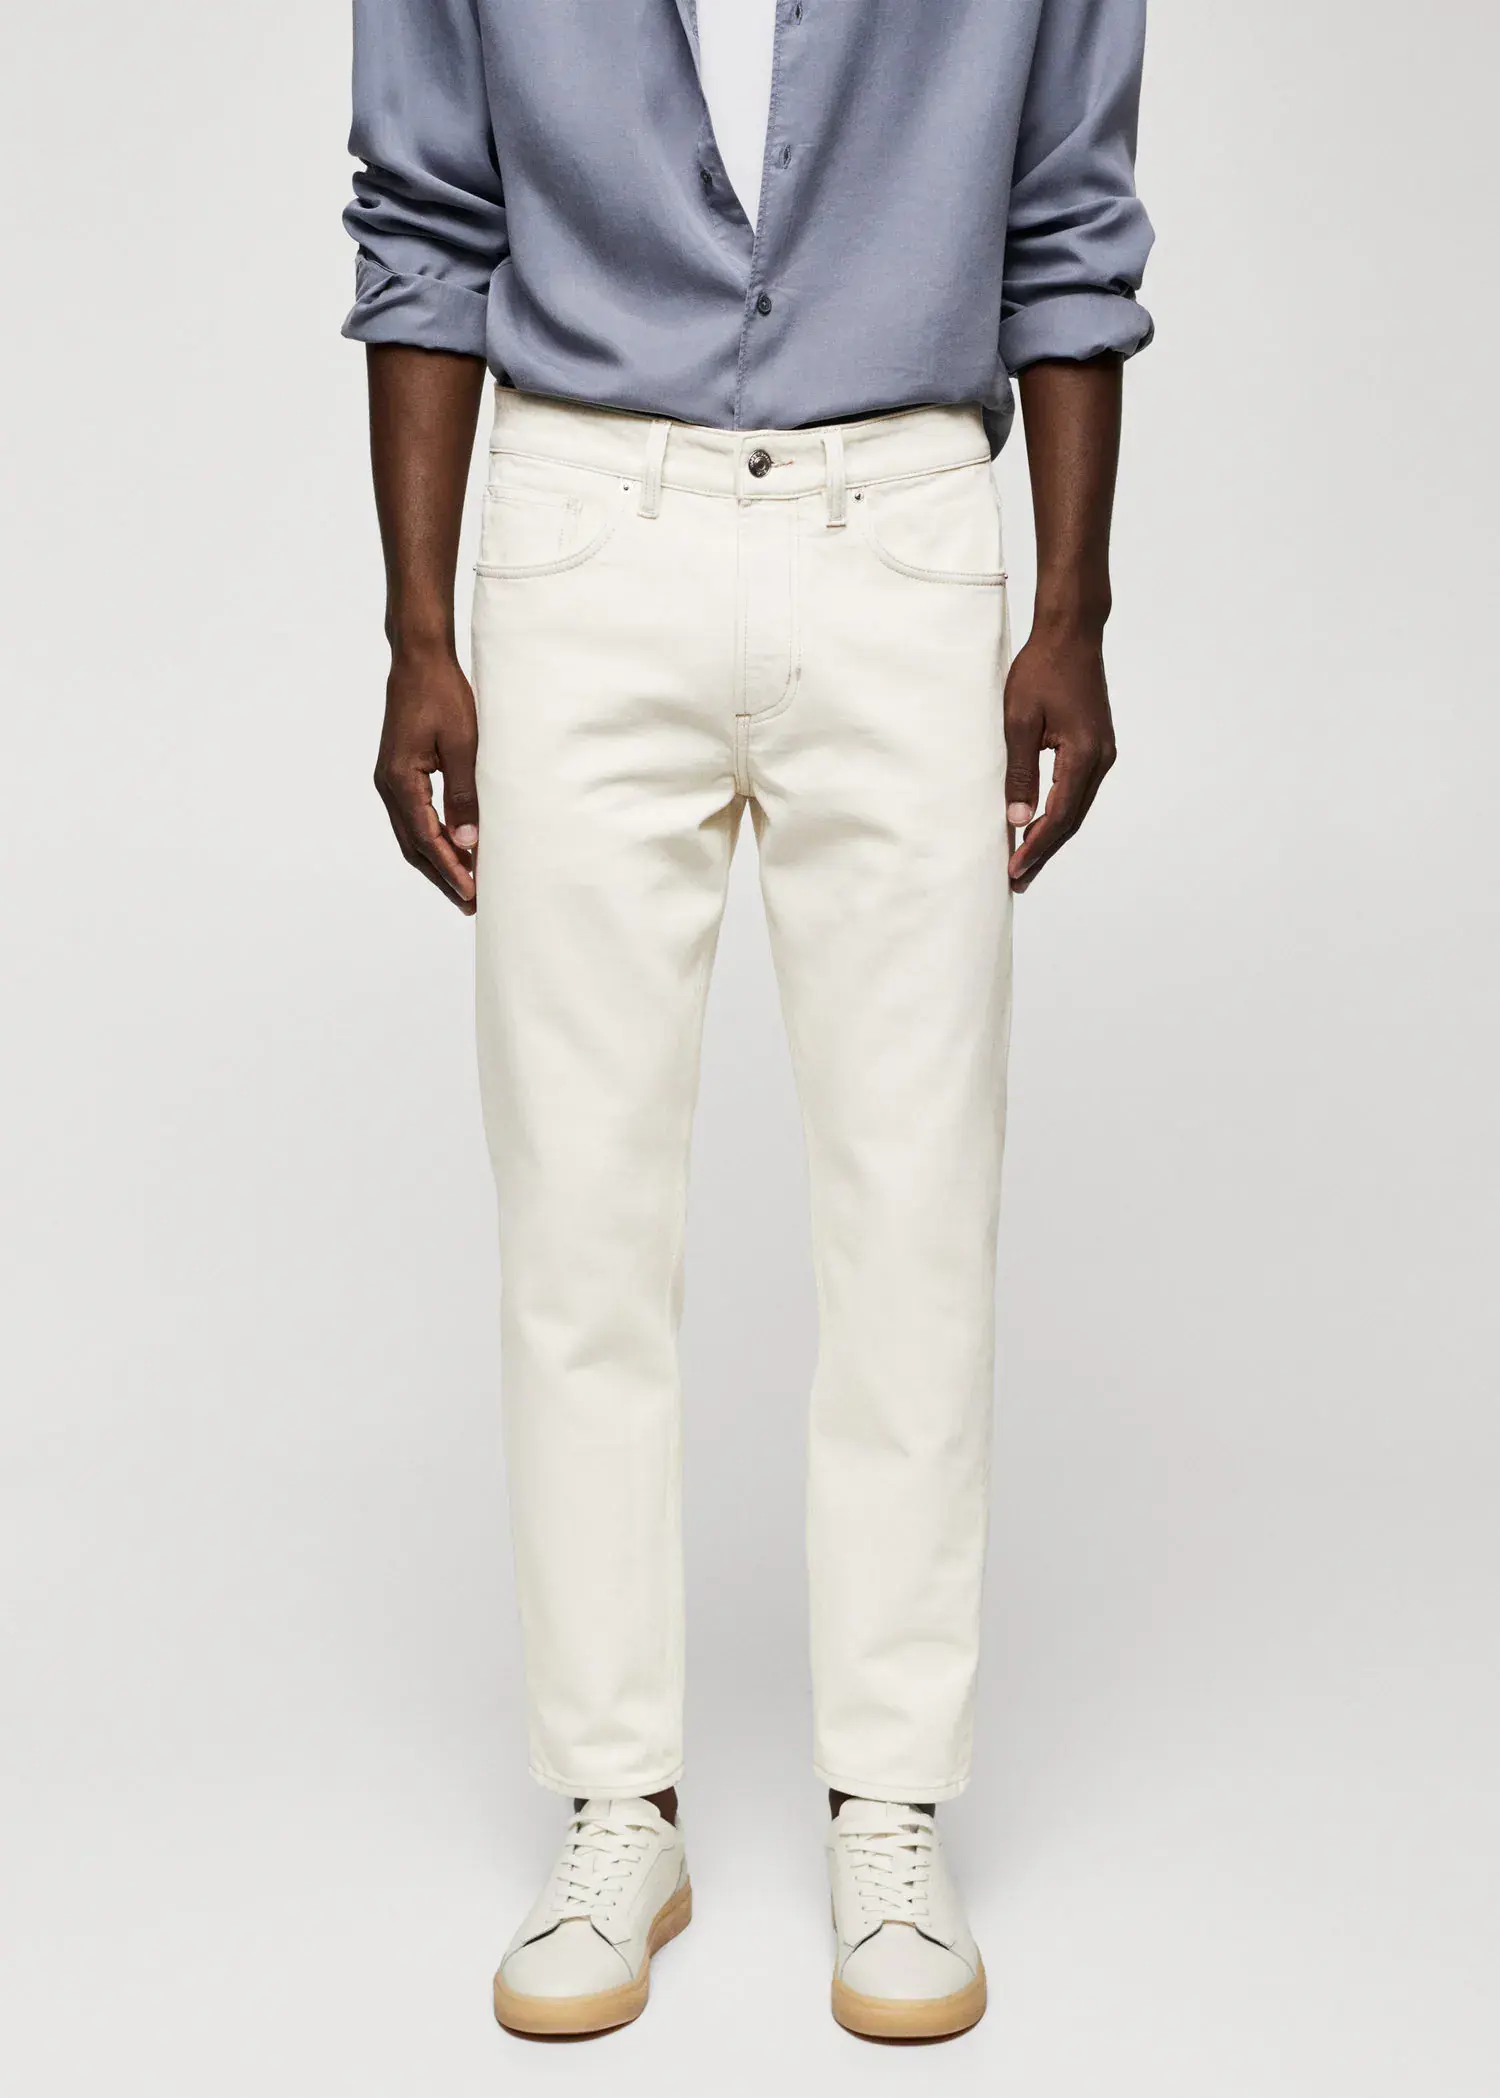 Mango Ben tapered cropped jeans. a person wearing white pants and a blue shirt. 